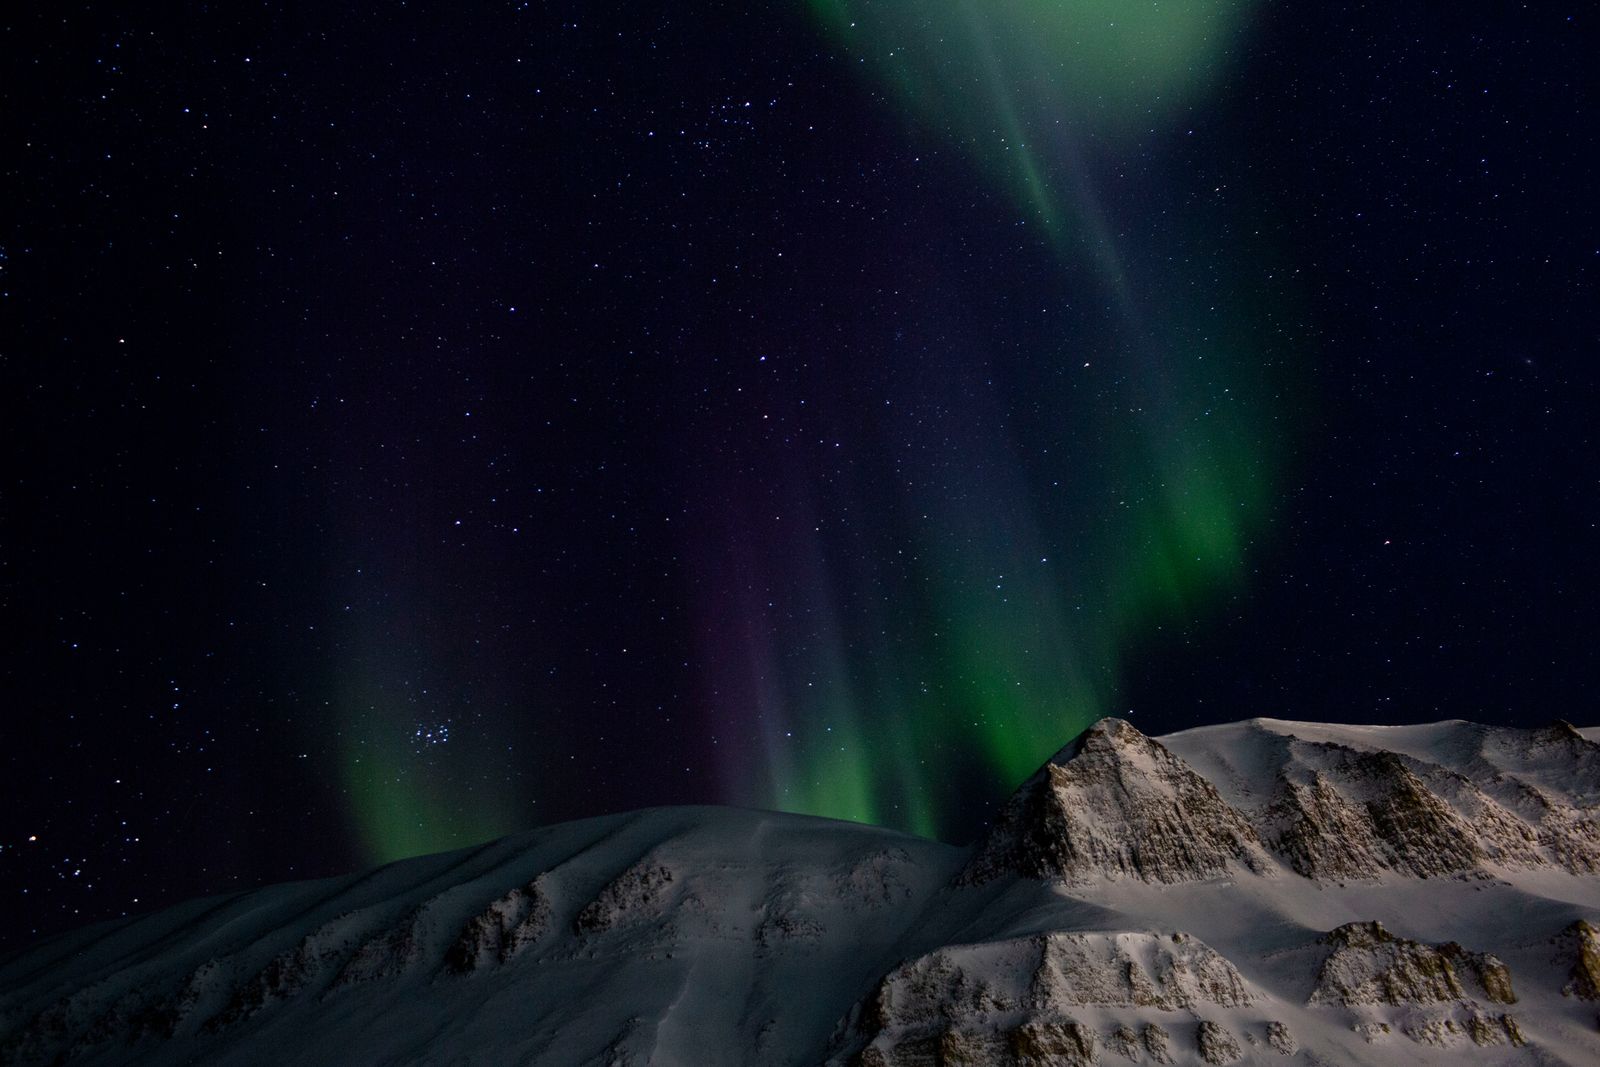 © Axelle de Russé - Only the Northern Lights illuminate the darkness of the polar night. Februa-ry 209, 11pm.